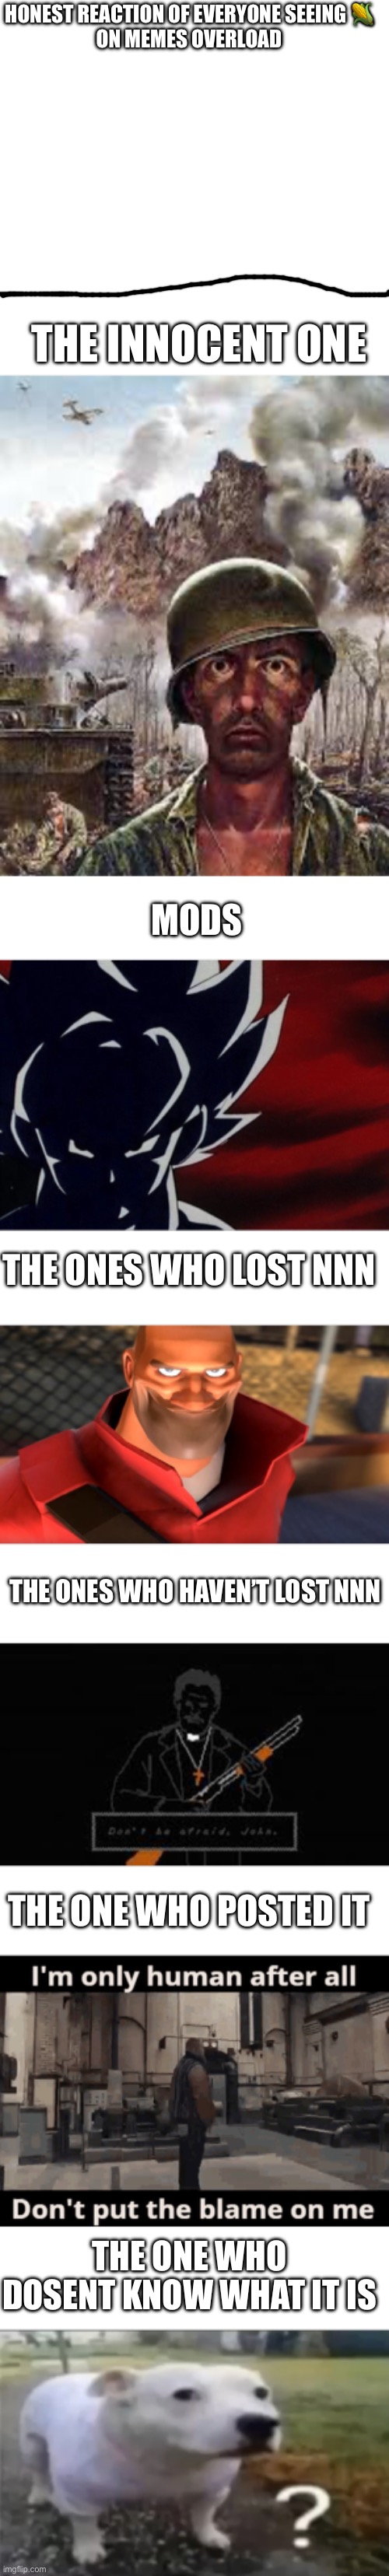 HONEST REACTION OF EVERYONE SEEING 🌽
ON MEMES OVERLOAD; THE INNOCENT ONE; MODS; THE ONES WHO LOST NNN; THE ONES WHO HAVEN’T LOST NNN; THE ONE WHO POSTED IT; THE ONE WHO DOSENT KNOW WHAT IT IS | image tagged in memes,blank transparent square,thousand yard stare,super saiyan goku stare,tf2 soldier smiling,don't be afraid john | made w/ Imgflip meme maker